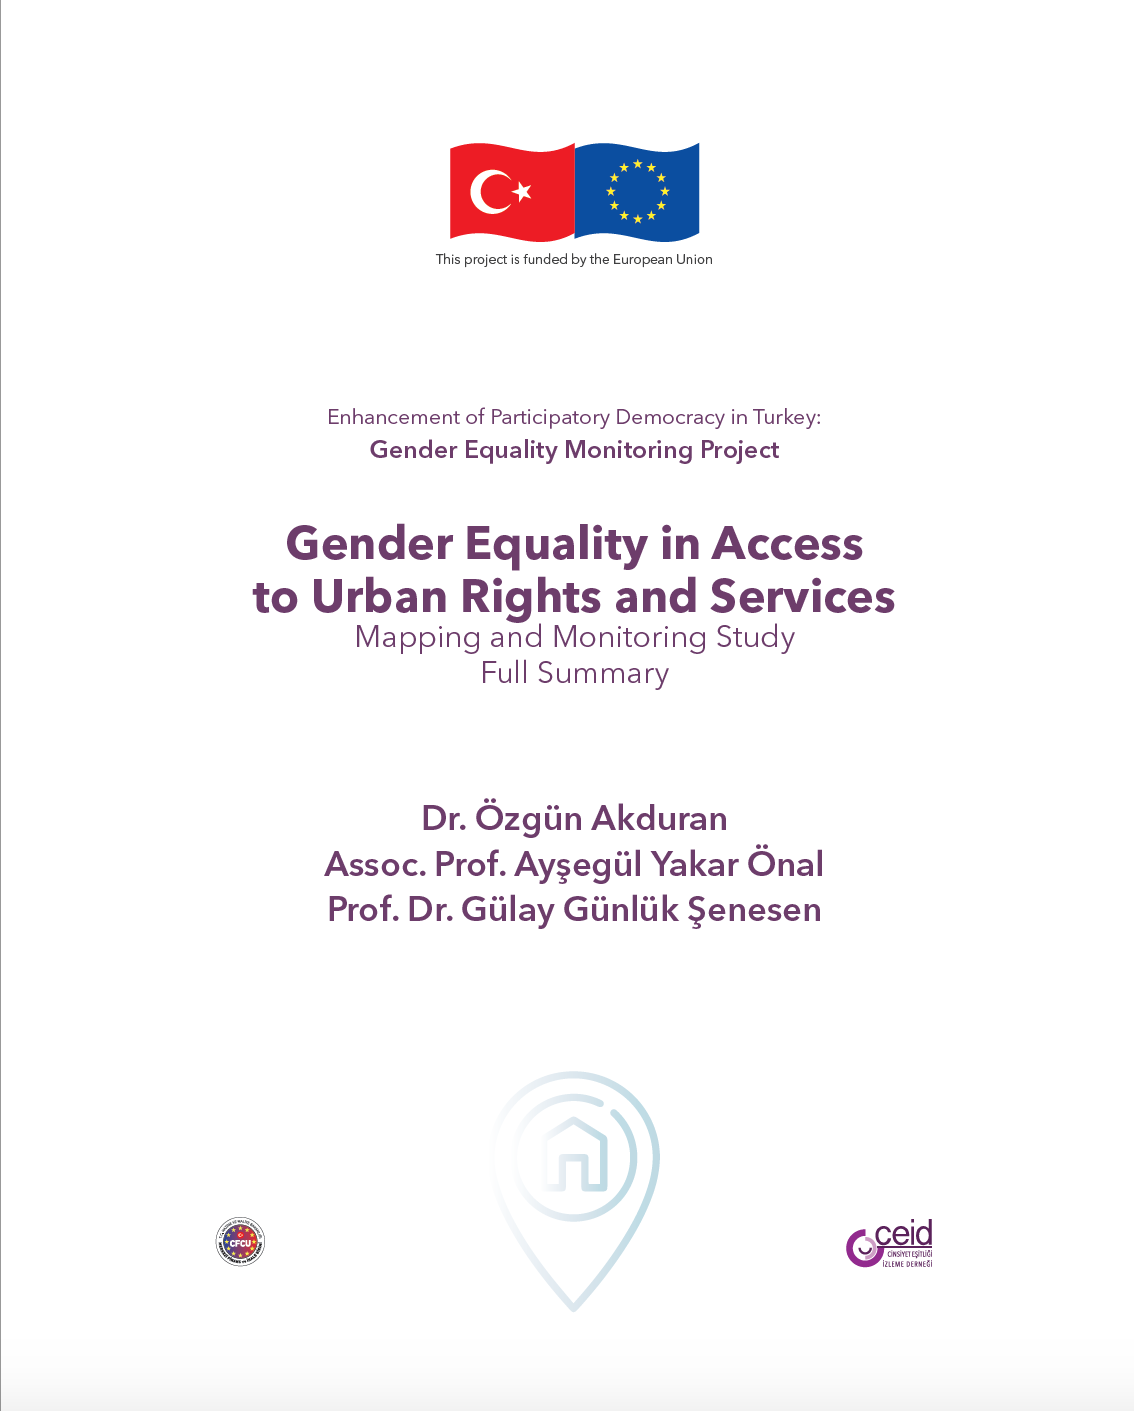 Gender Equality in Access to Urban Rights and Services